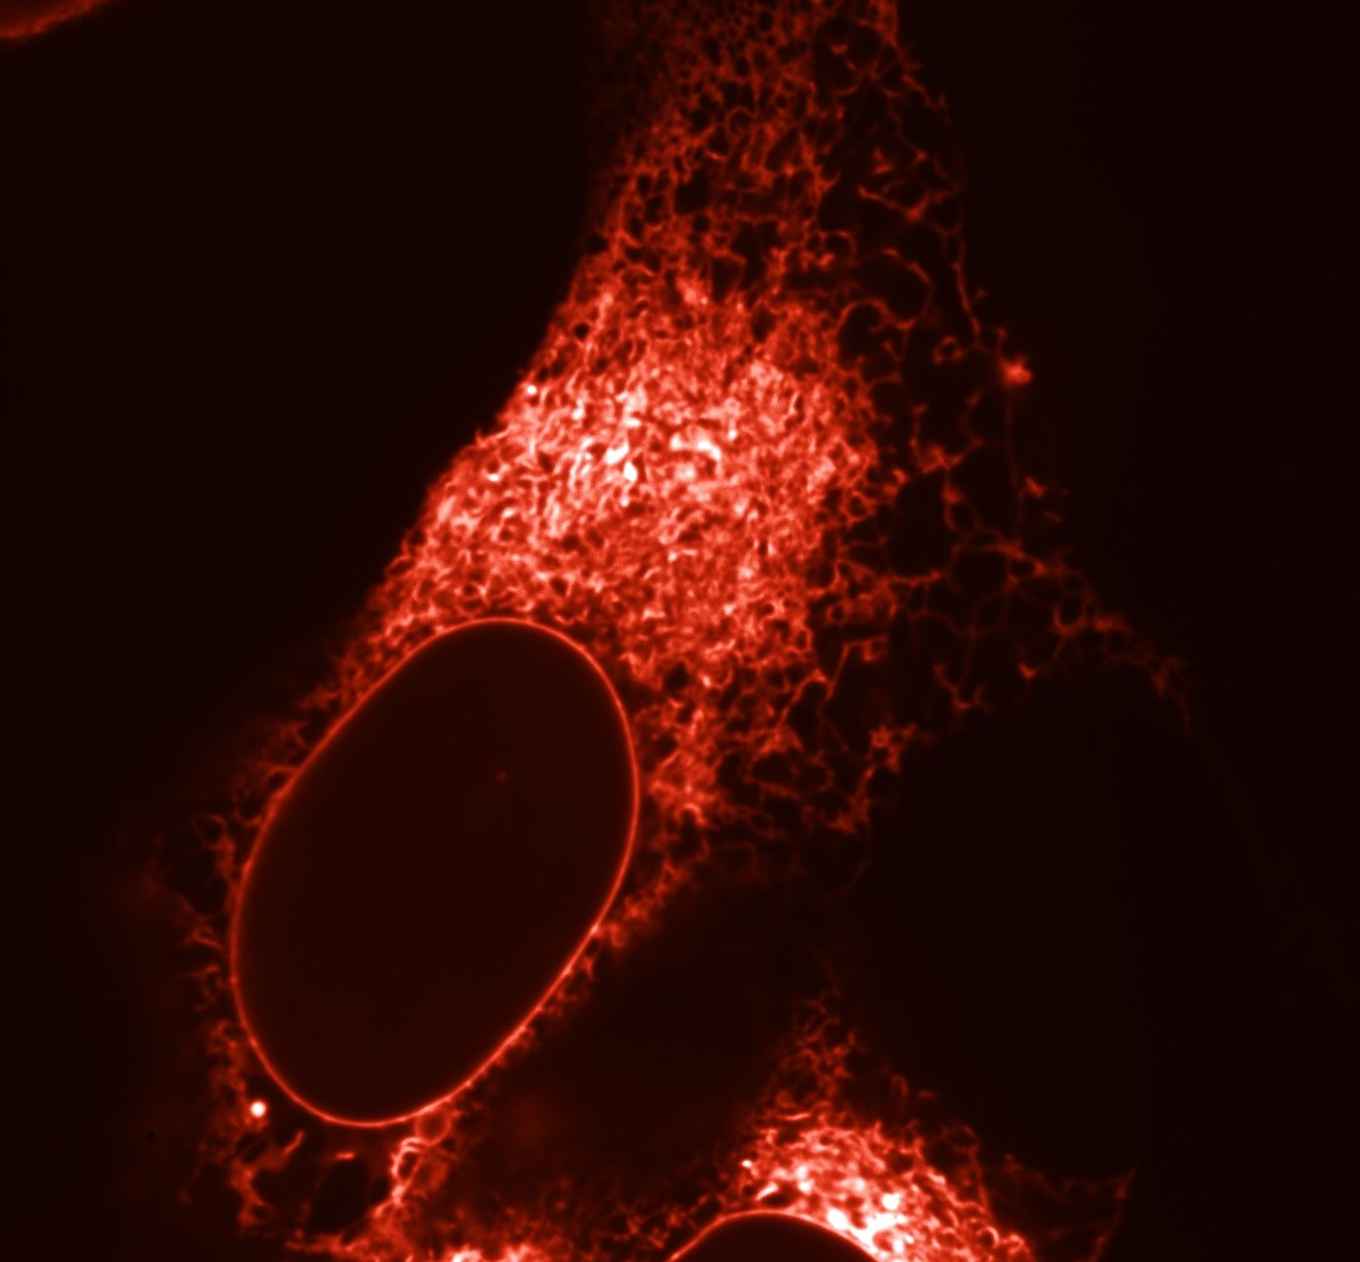 mScarlet illuminating two structures (the Endoplasmic reticulum and the nuclear envelope) within a cell